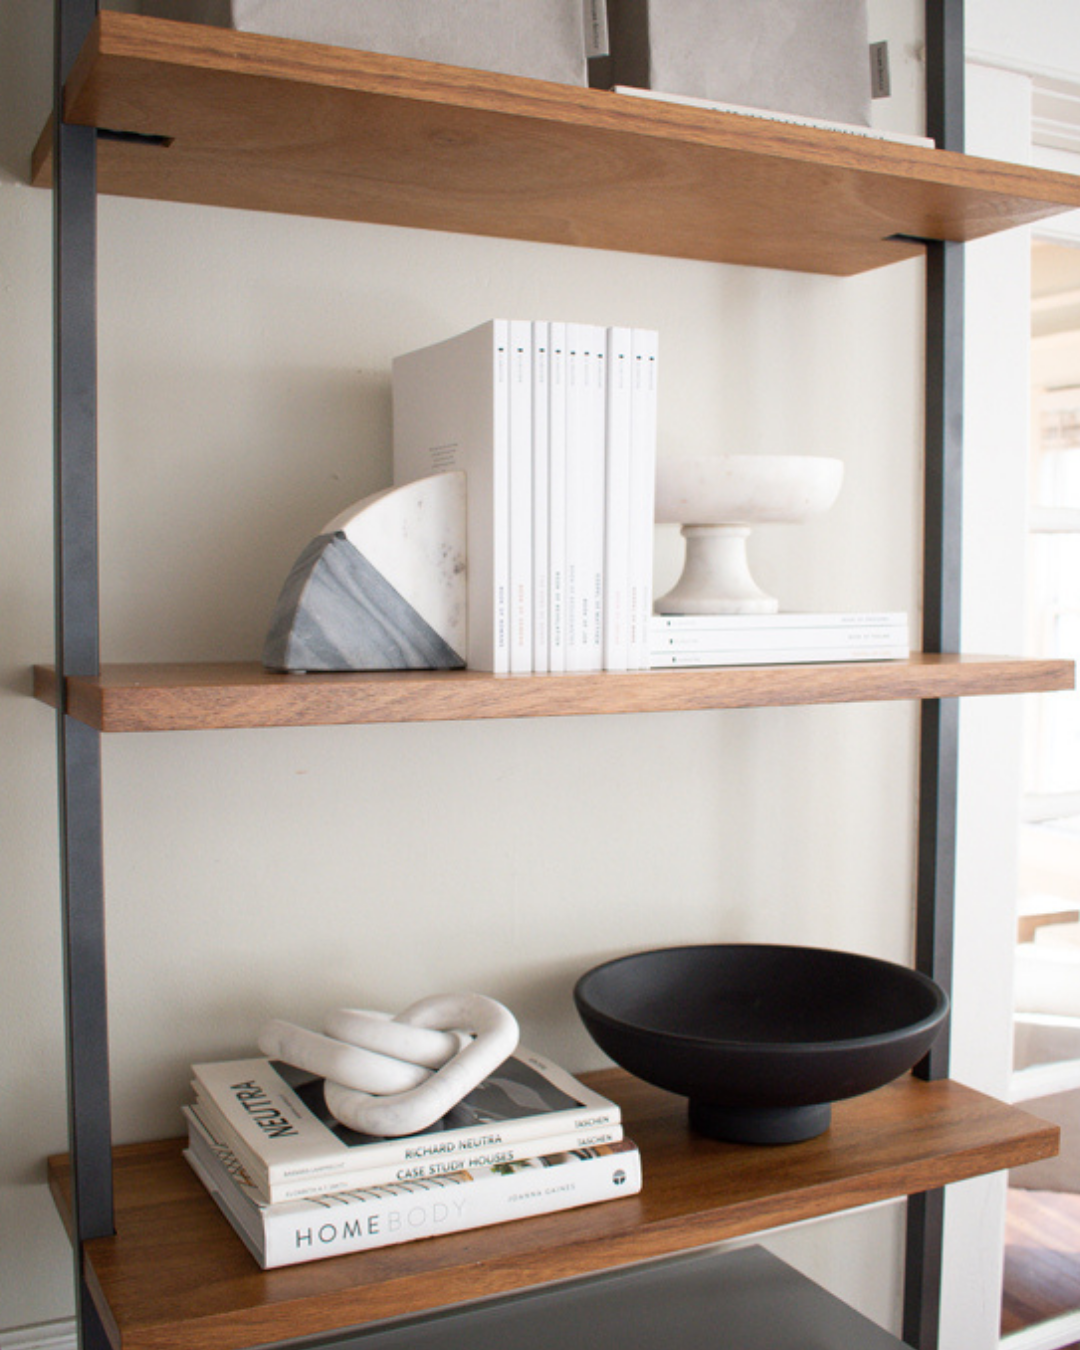 Home decor - image features a marble bowl, book end, and black wooden bowl sitting on wooden shelves. The image represents the selection of decorative objects we sell for your home. Sterling Harper specializes in Scandinavian, minimal home decor.